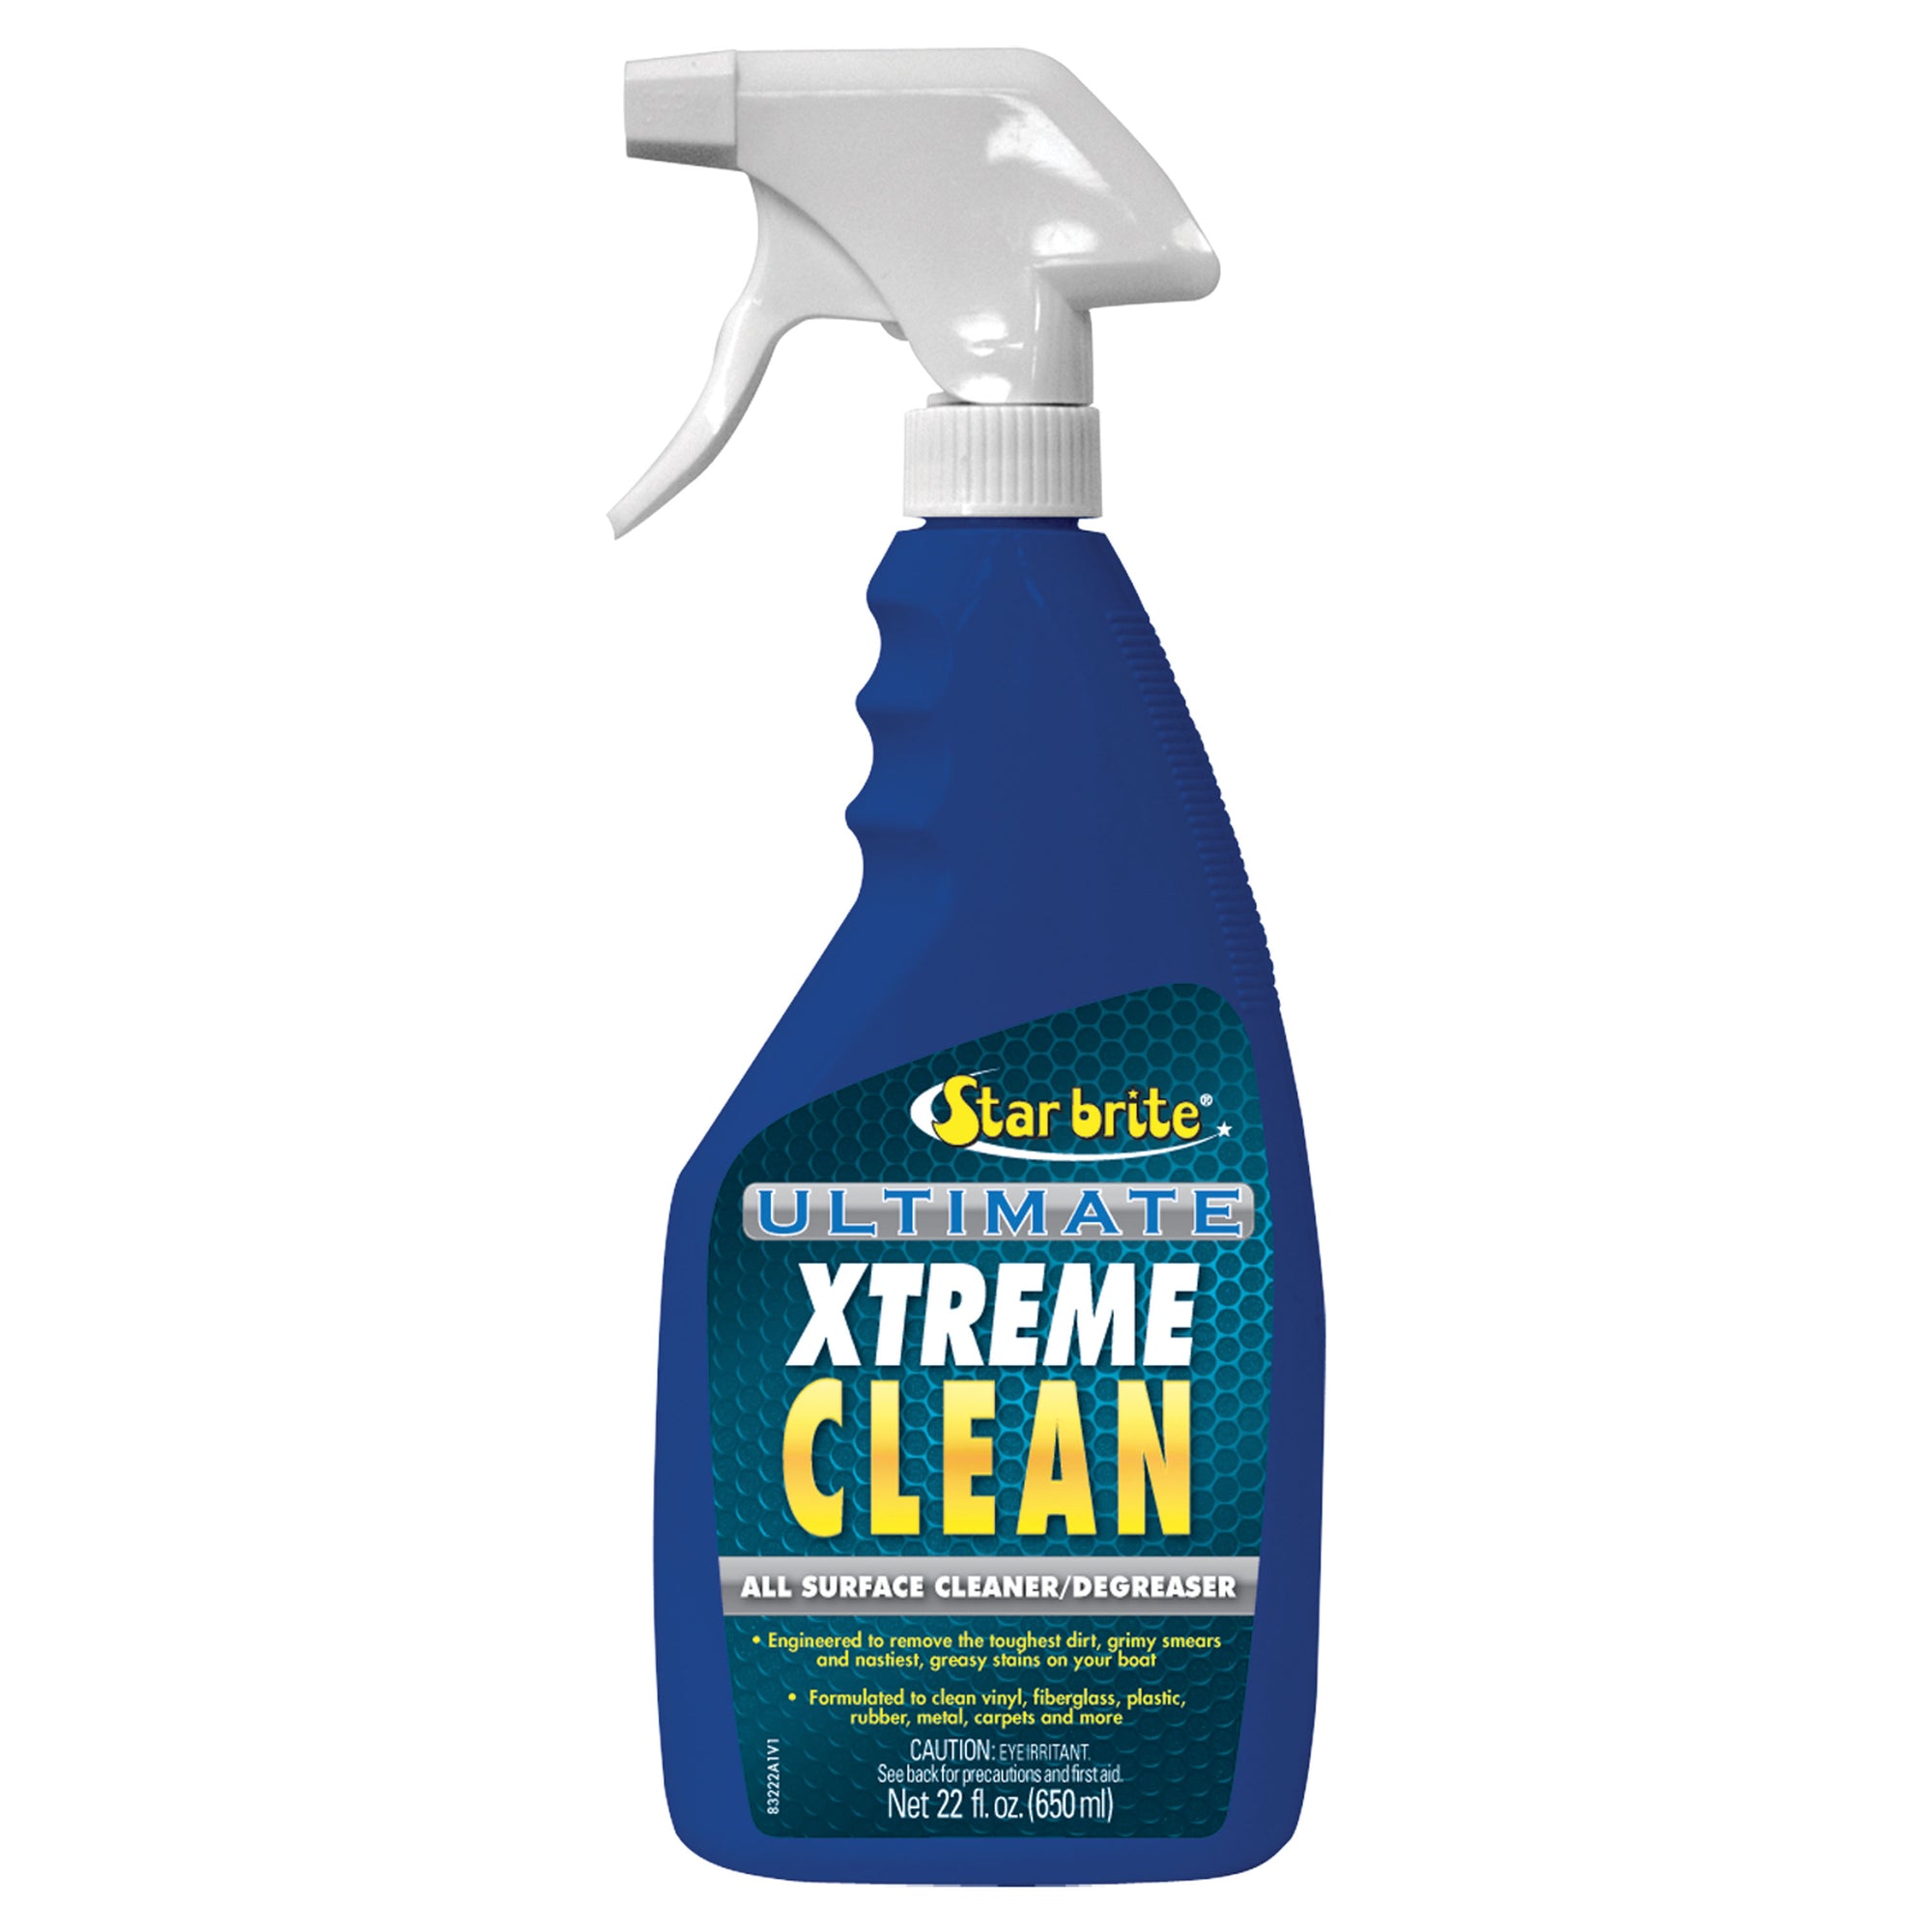 Star brite 083222P Ultimate Xtreme Clean All Surface Cleaner and Degreaser - 22 oz